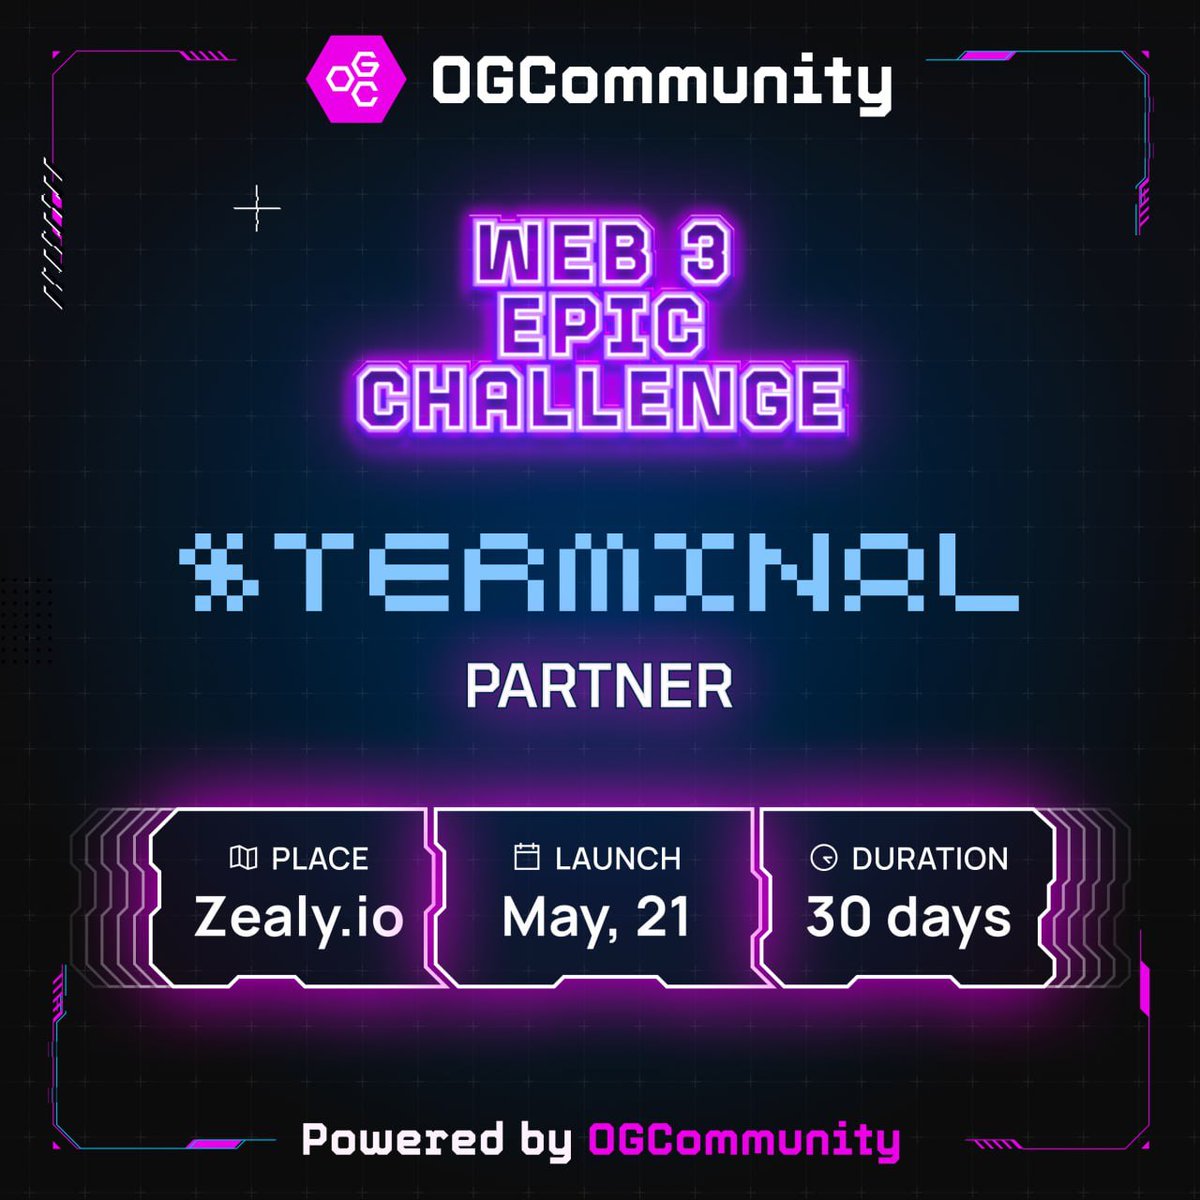 WEB3 EPIC CHALLENGE 🚀 @TimeToTerminal partnered with @OGCommunity_X for a WEB3 EPIC CHALLENG We will share more information about WEB3 EPIC CHALLENG in couple days, stay tuned! Mark your calendars players! May 21 / 30 days / 50,000 $USDT prize pool